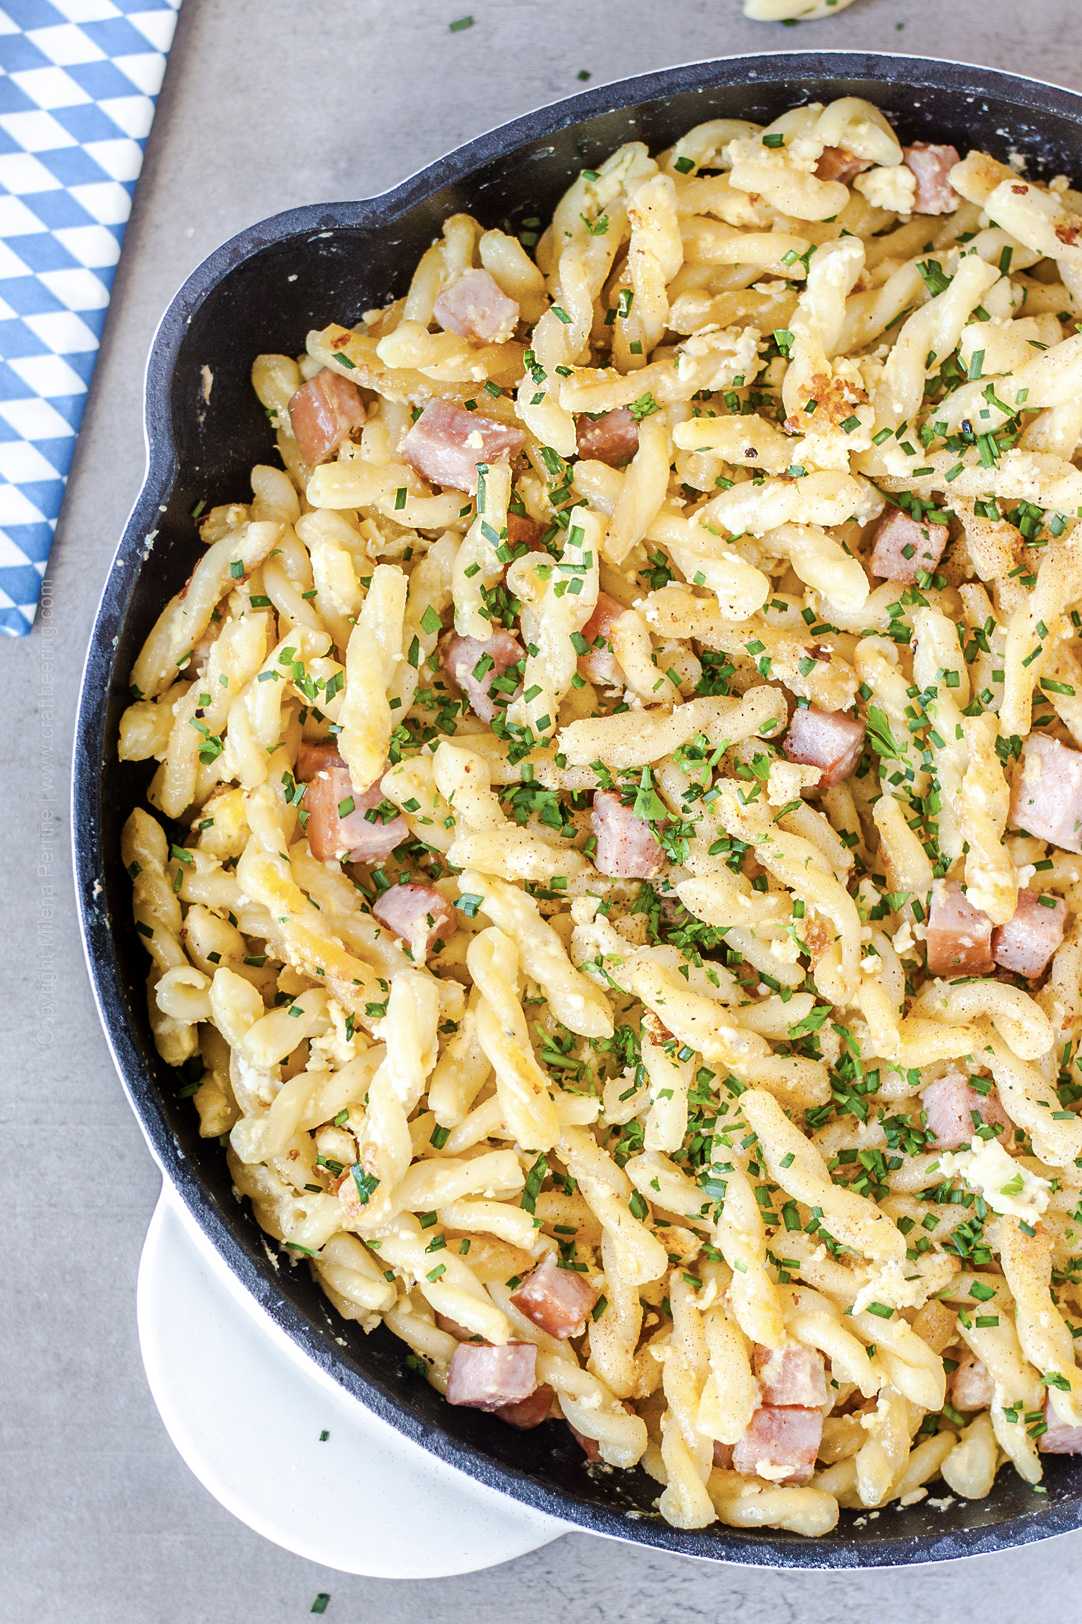 Gemelli short cut pasta, pan fried with ham, egg and cream. Known as Schinkennudeln this is classic beer garden food and a family favorite across Germany.